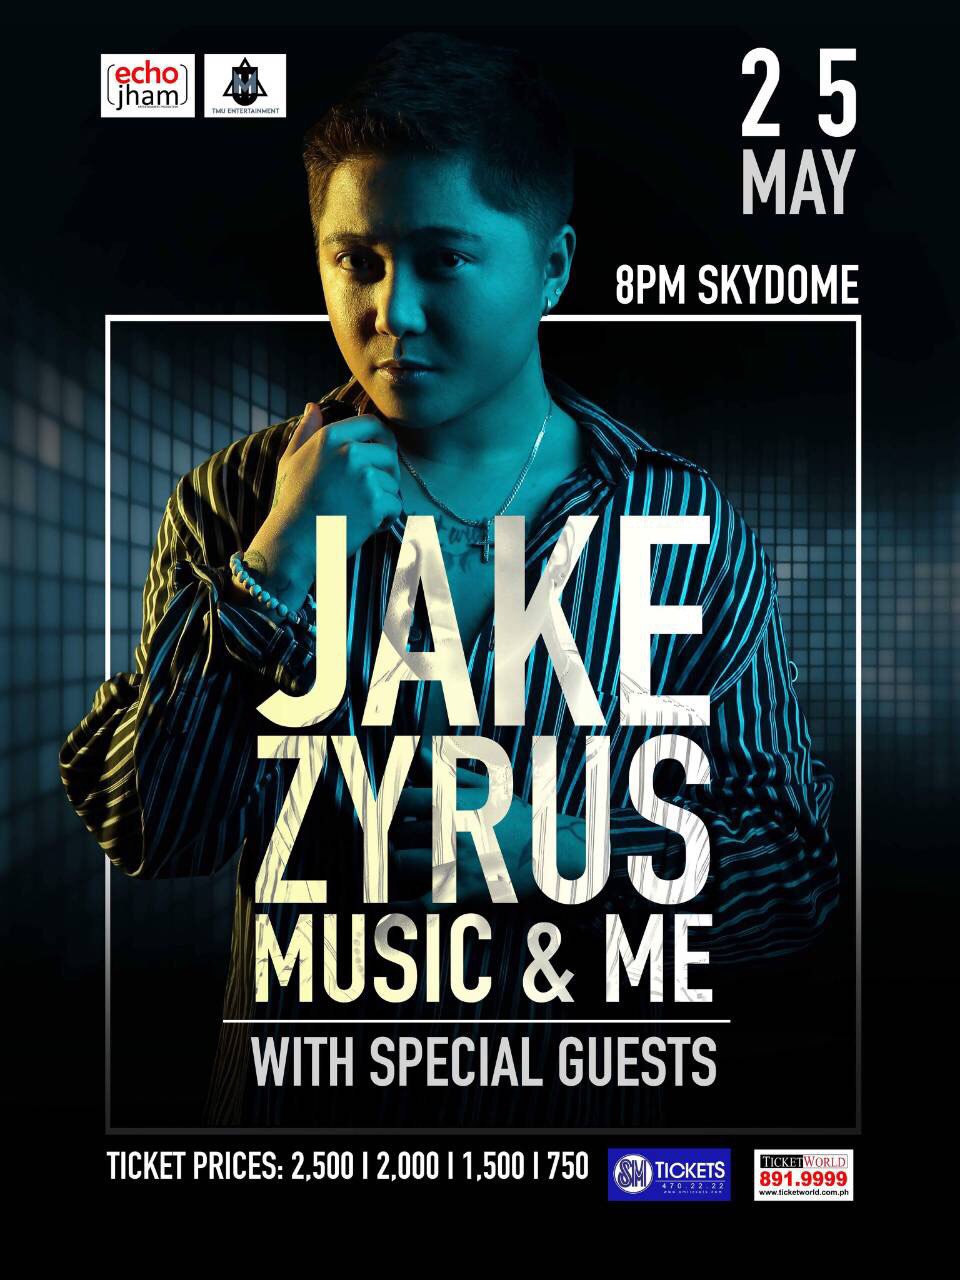 jake-zyrus-music-and-me-concert